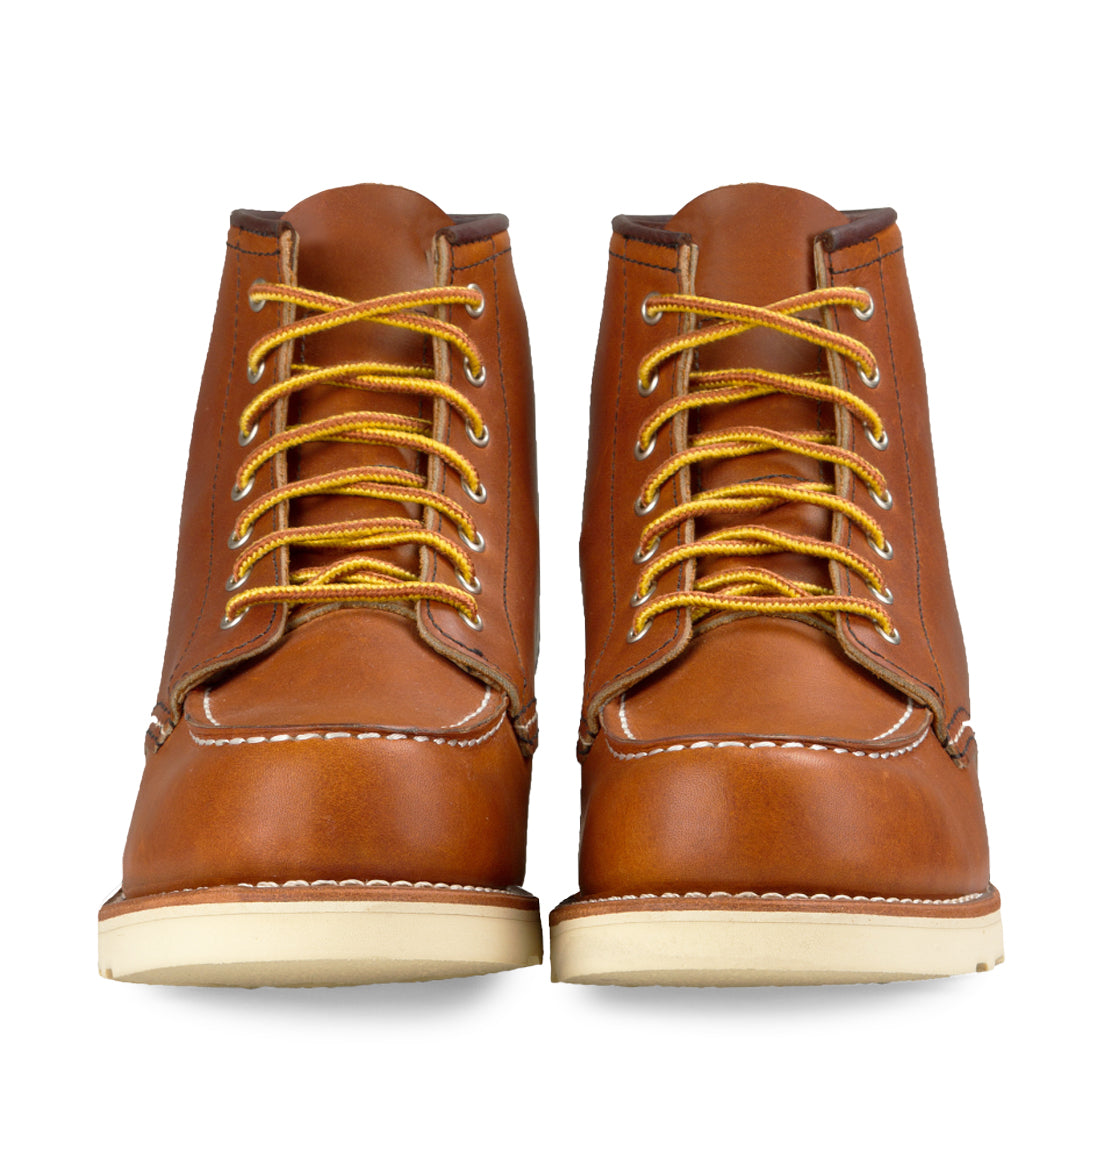 Red Wing womens moc toe midlands